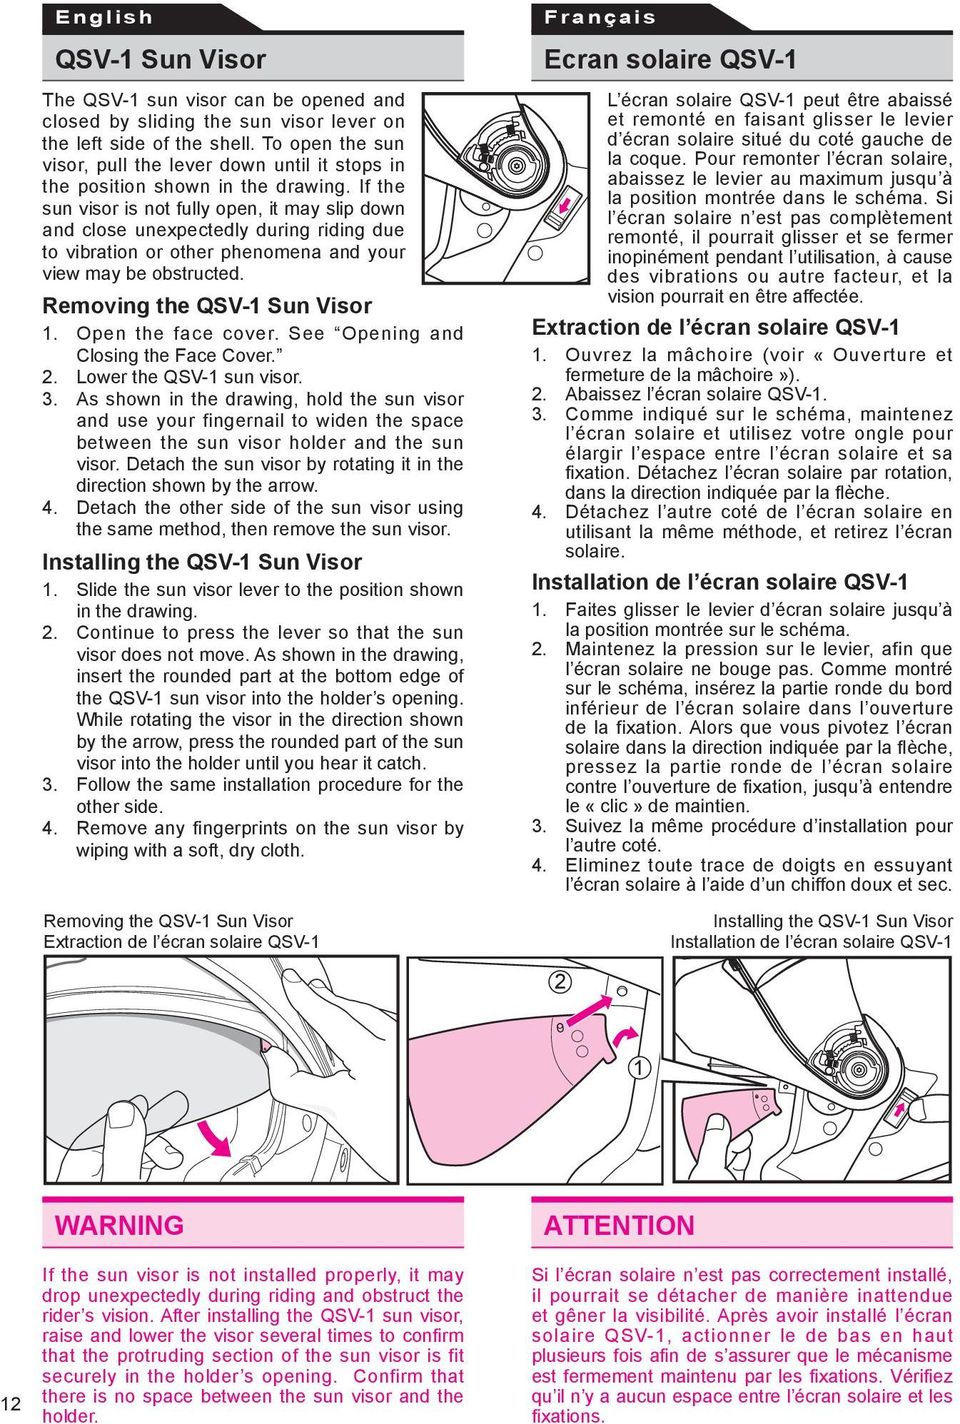 If the sun visor is not fully open, it may slip down and close unexpectedly during riding due to vibration or other phenomena and your view may be obstructed. Removing the QSV-1 Sun Visor 1.